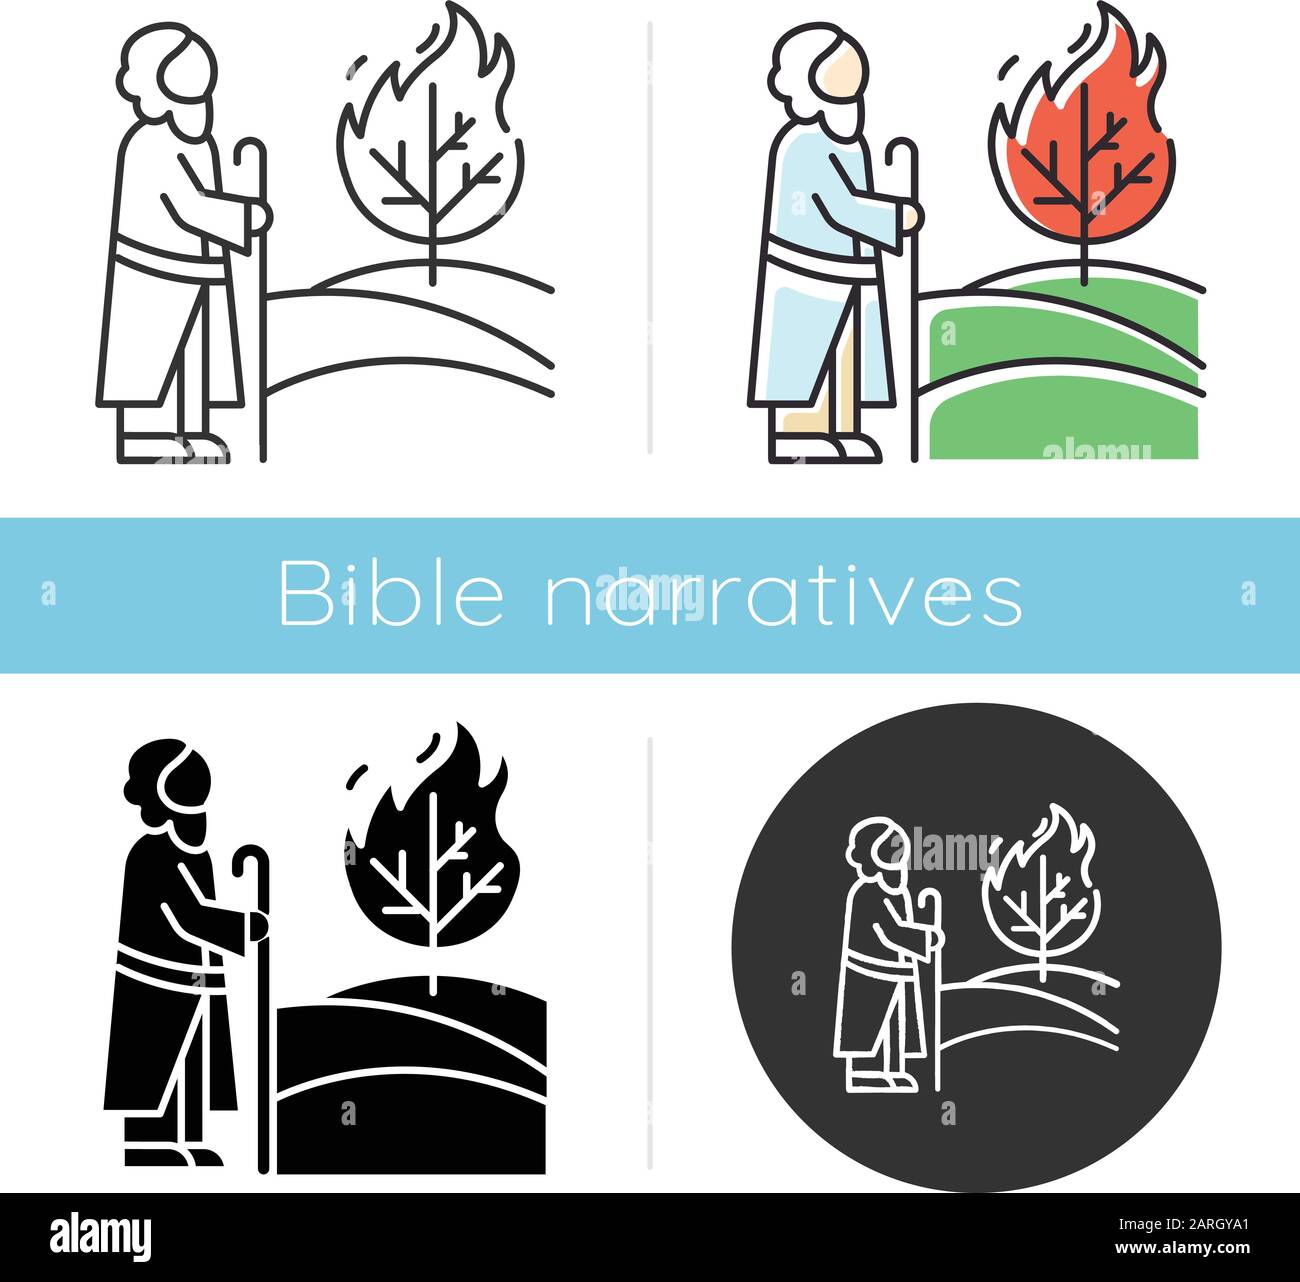 Moses and the burning bush Bible story icon. Prophet and tree in flame. Religious legend. Biblical narrative. Glyph, chalk, linear and color styles. I Stock Vector